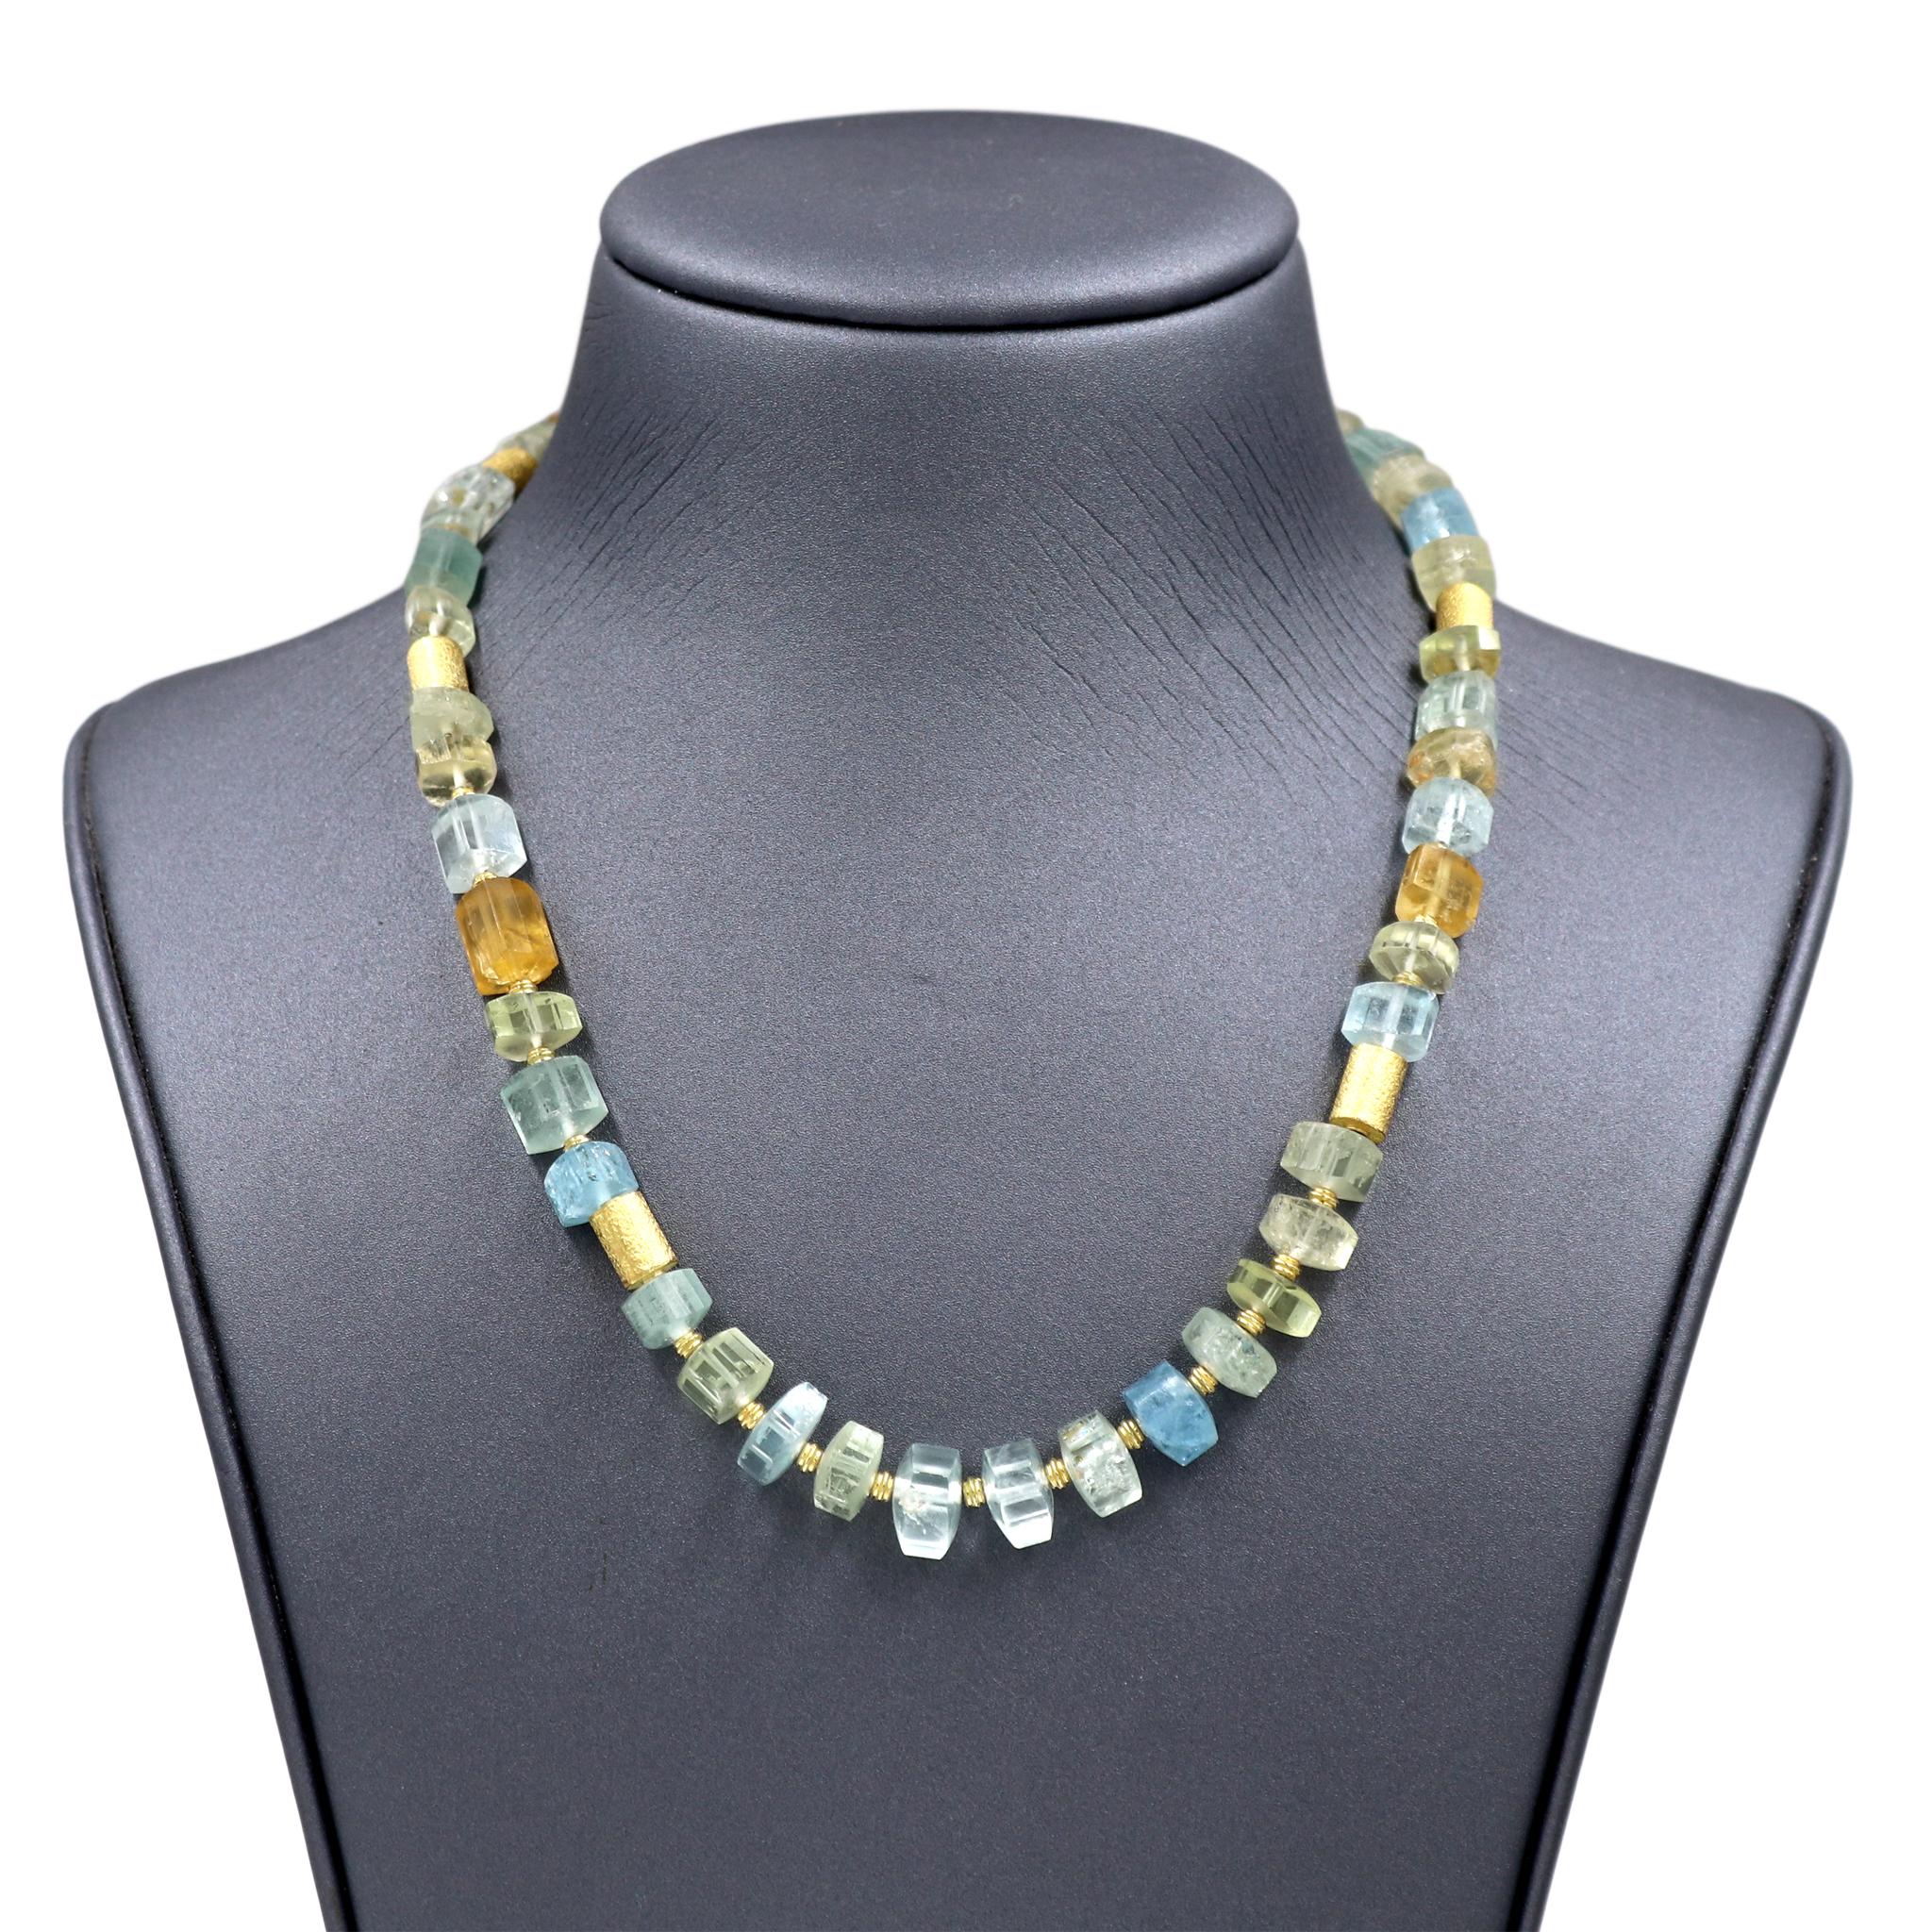 Aquamarine Beryl Crystals Necklace hand-fabricated by award-winning jewelry maker Barbara Heinrich in matte-finished 18k yellow gold featuring a stunning assortment of beryl crystals individually set between high karat yellow gold bead and tube